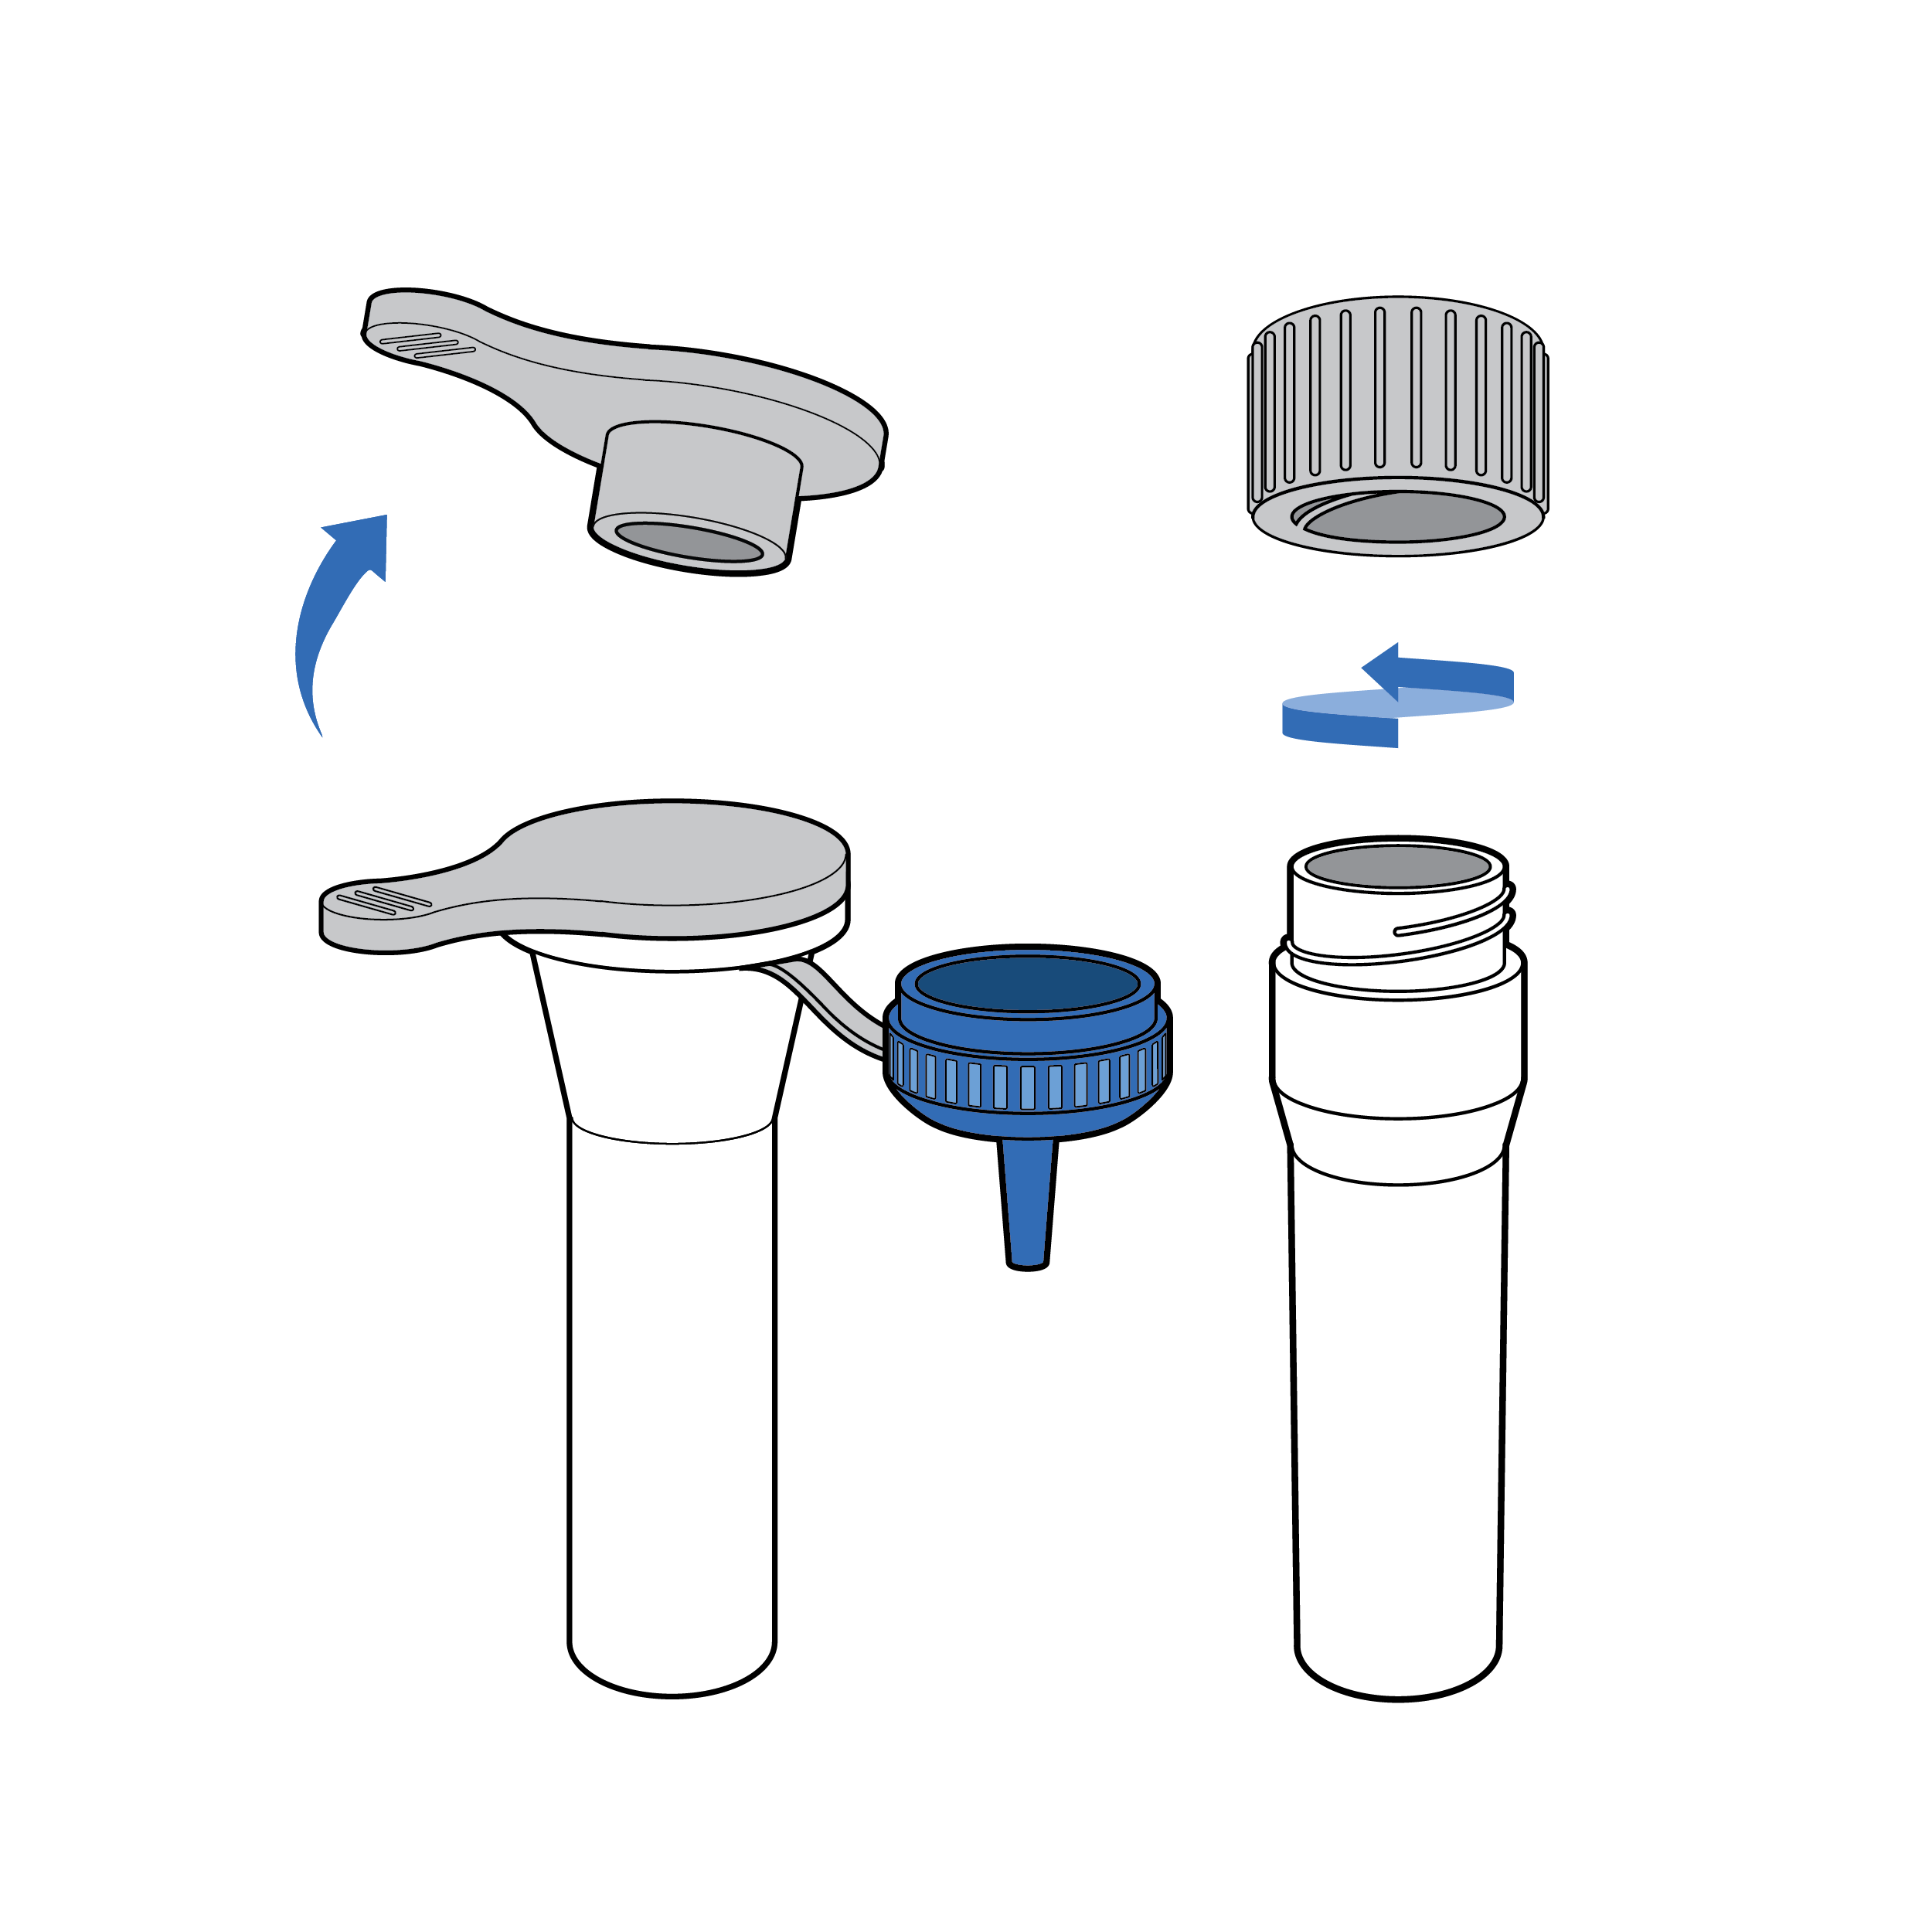 Two cylindrical vials with widened top-portions. The vial on the left has a cap with an elongated tab feature. An arrow indicates the cap can be removed by pushing on the tab. The vial on the right has threads on the cap. An arrow indicates it is removed by twisting.